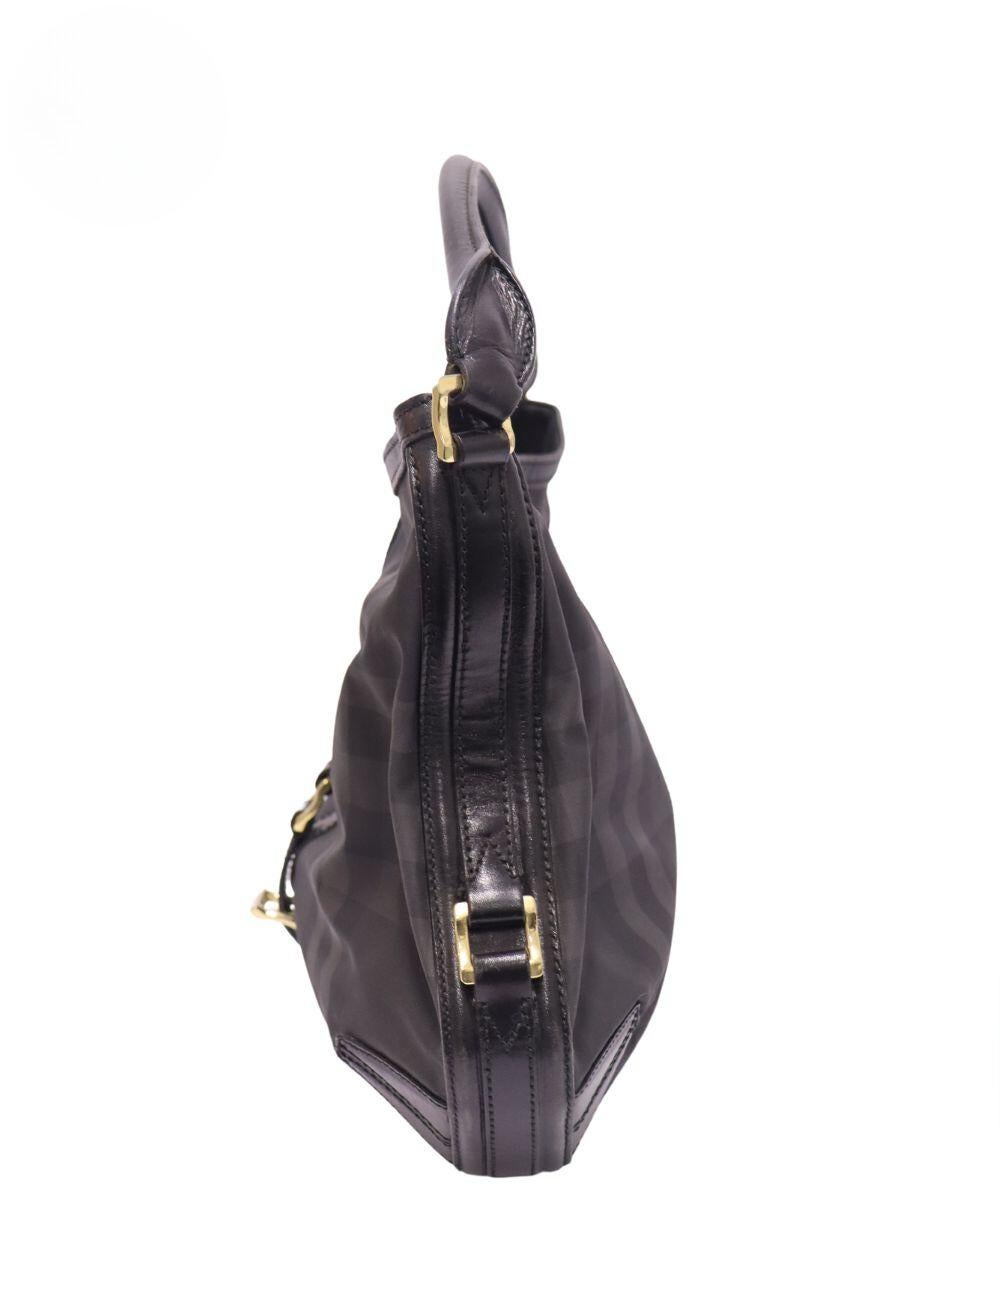 Burberry Smoked Check Hobo Bag, Features Leather Trim Embellishment, Zipper Closure and Three Interior Pockets.

Material: Leather
Hardware: Gold
Height: 30cm
Width: 36cm
Depth: 5cm
Handle Drop: 18cm
Overall condition: Fair
Interior condition: Signs